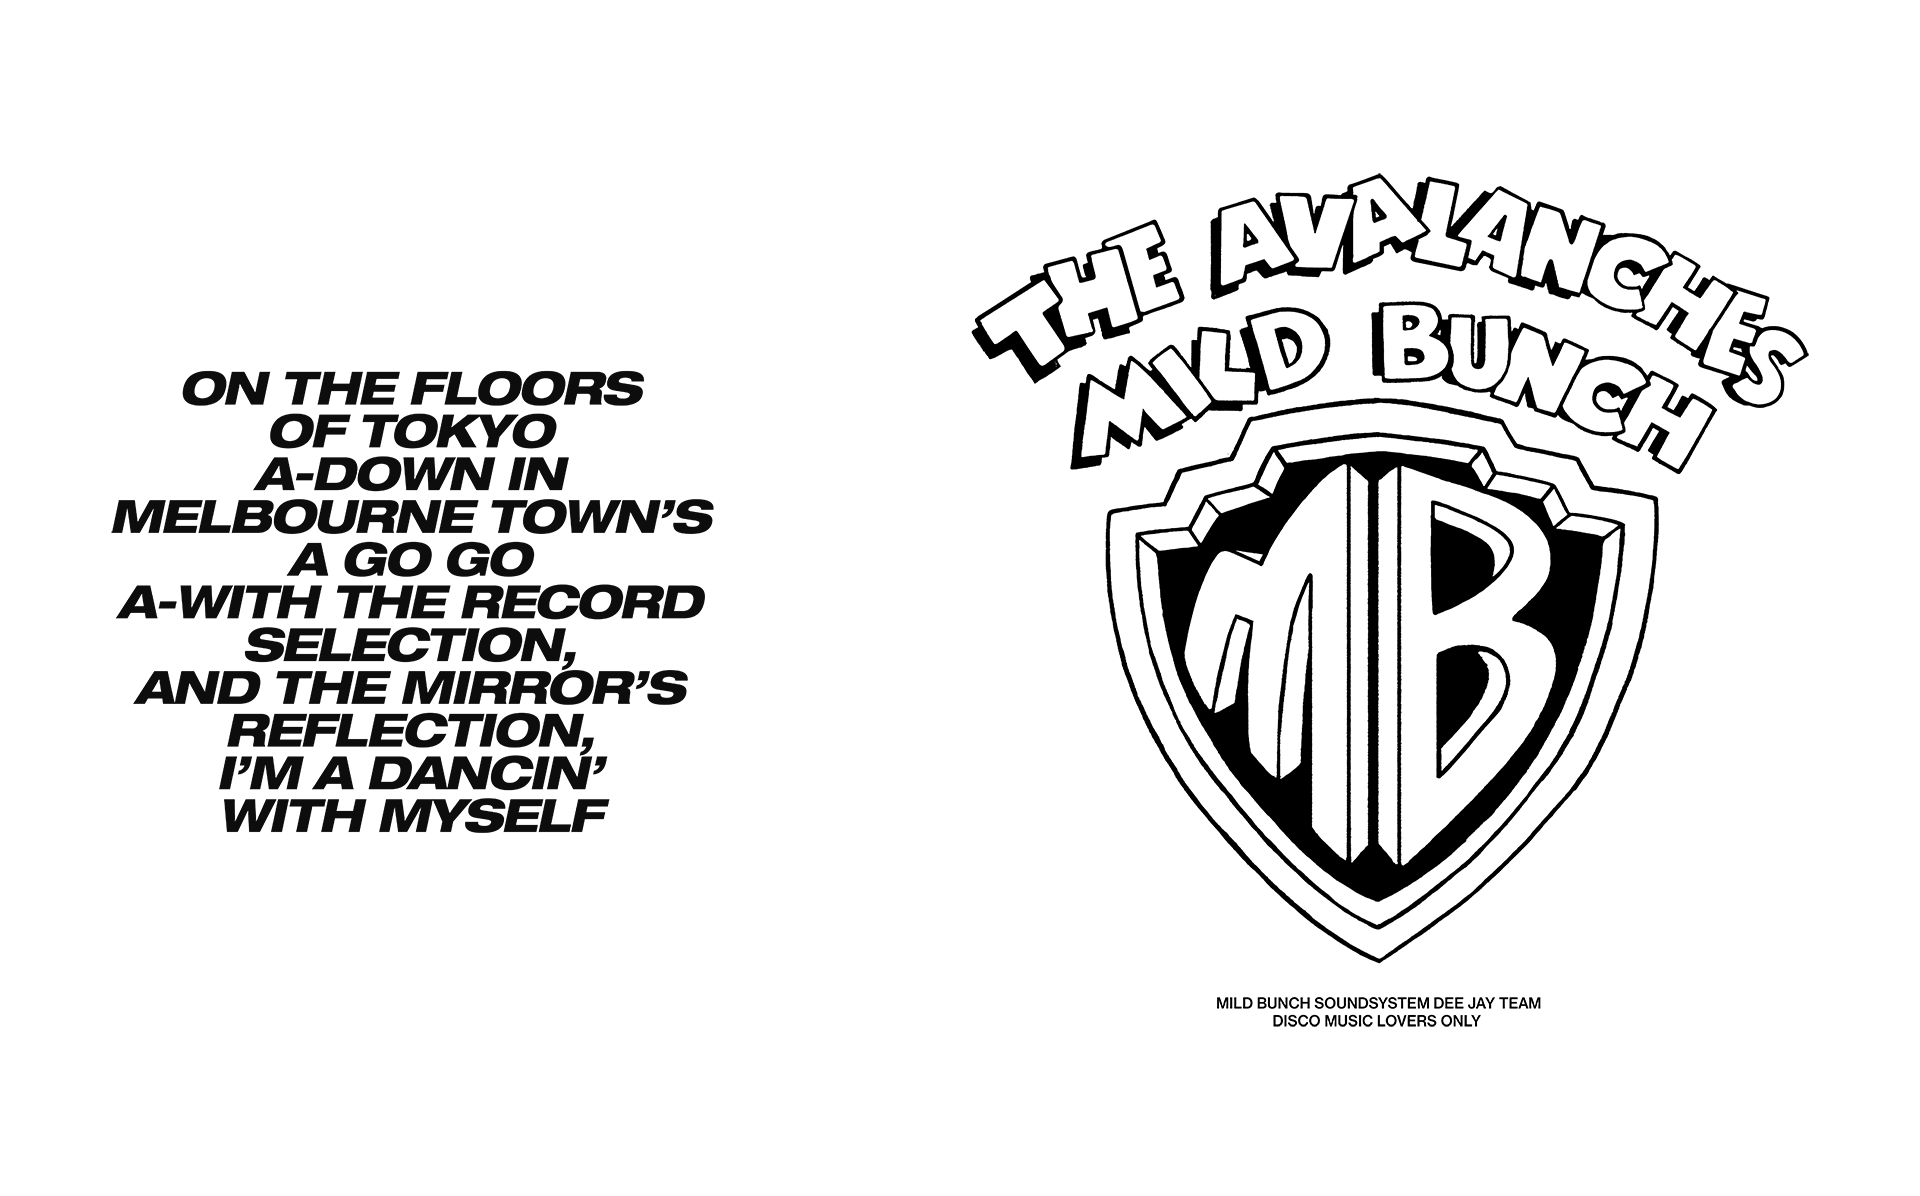 MILD BUNCH THE AVALANCHES tripster